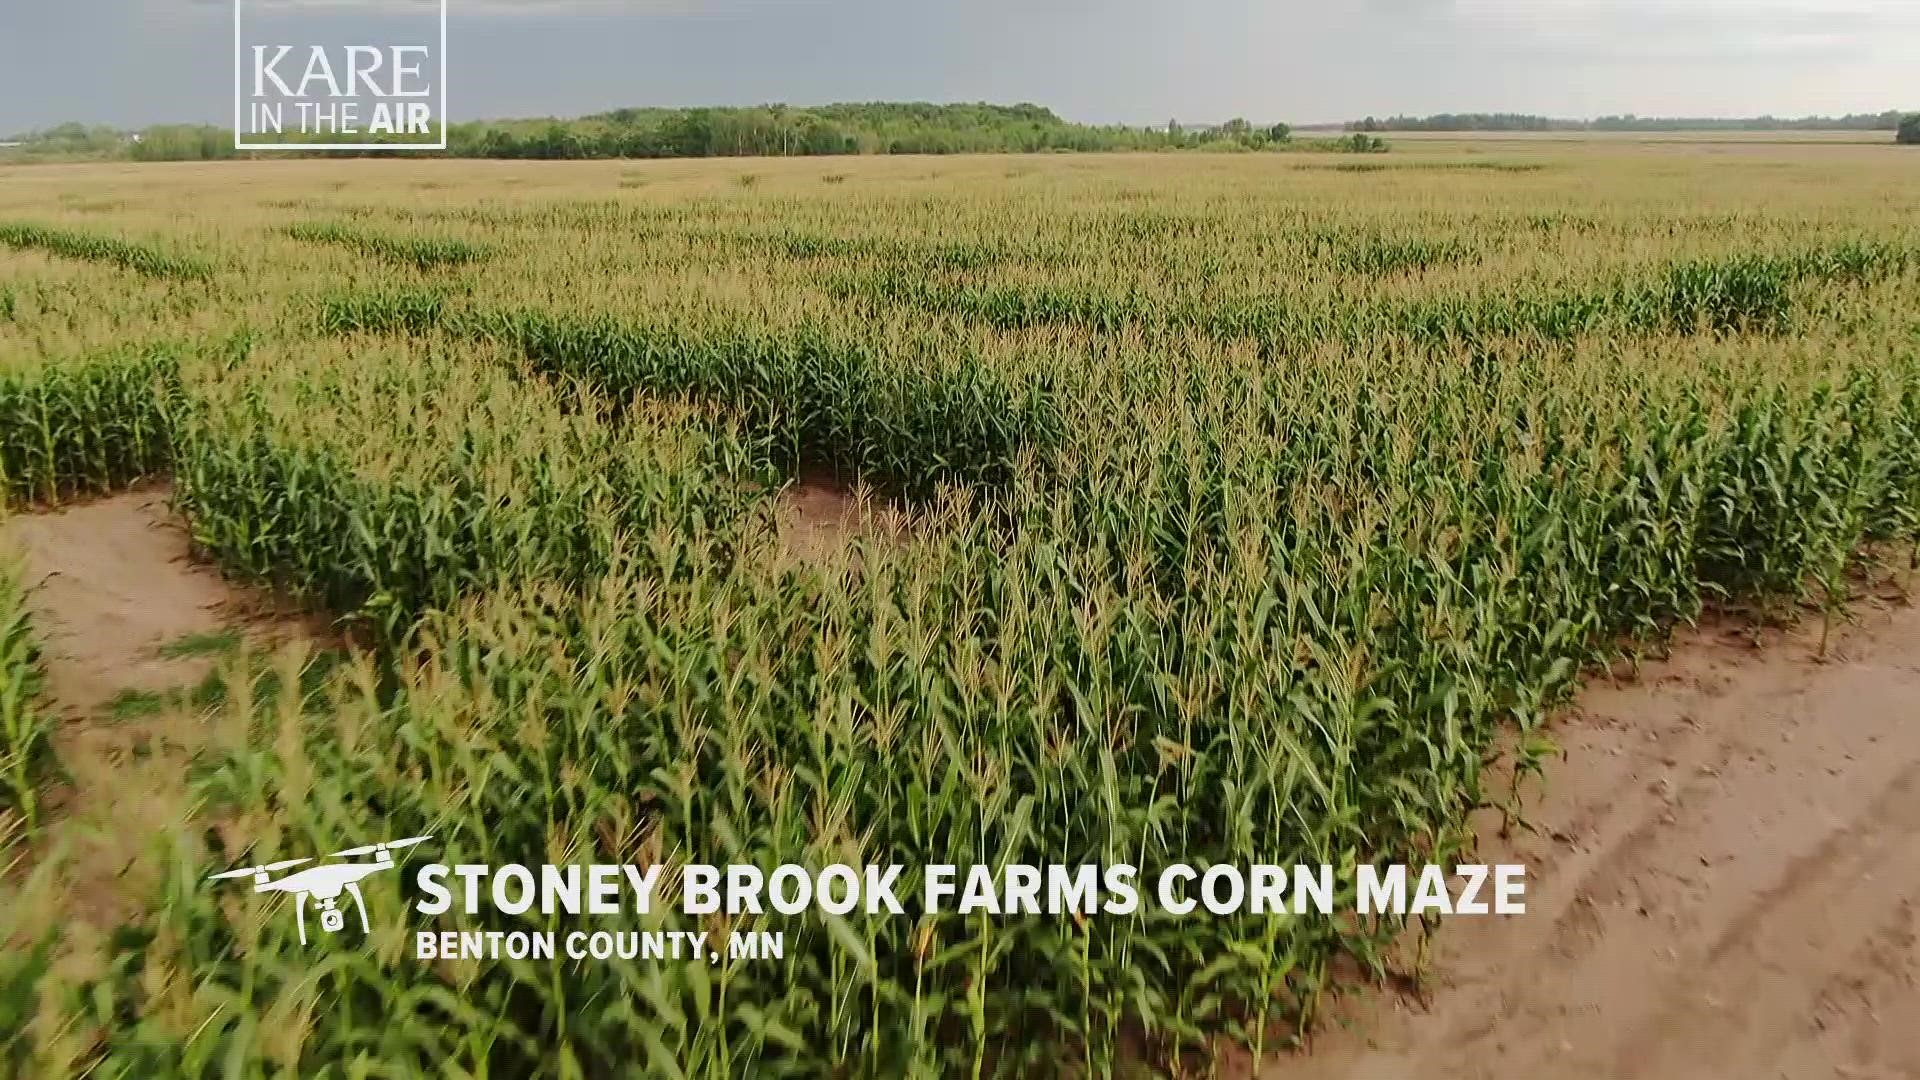 Our drone series takes us above Foley, and a vegetable farm with a serious side hack that is vying for a spot in the Guiness Book of World Records.